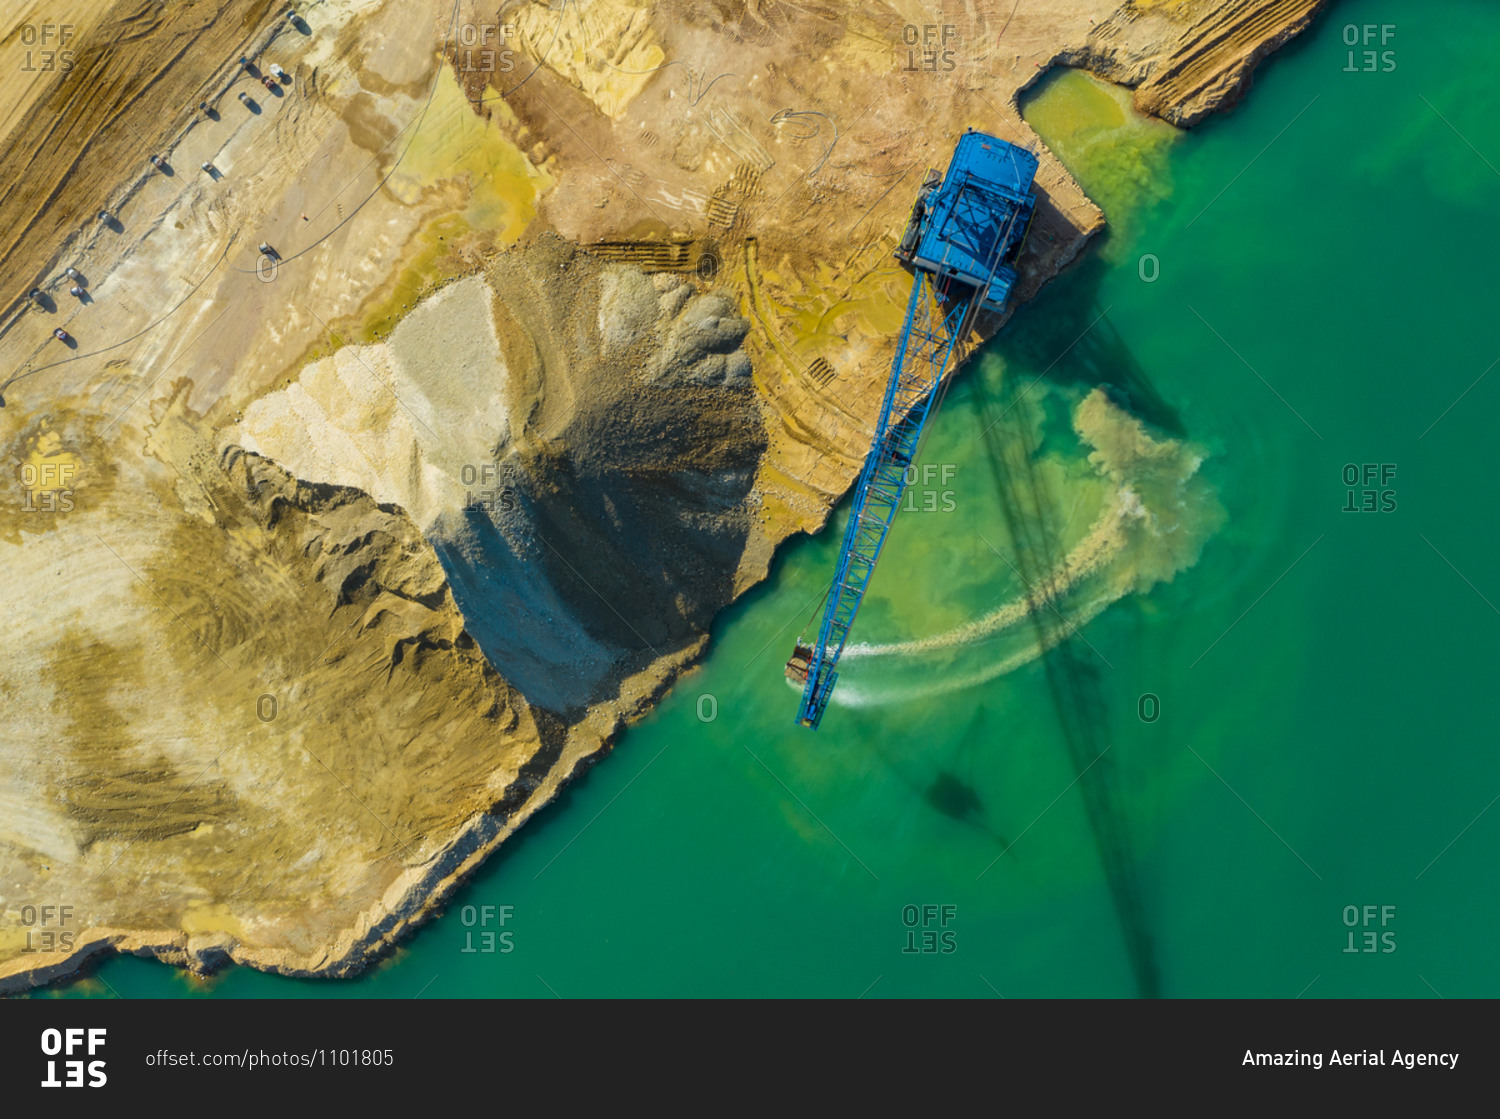 Aerial view of a blue crane operating on a quarry in Blackberry Township in Illinois, United States of America.